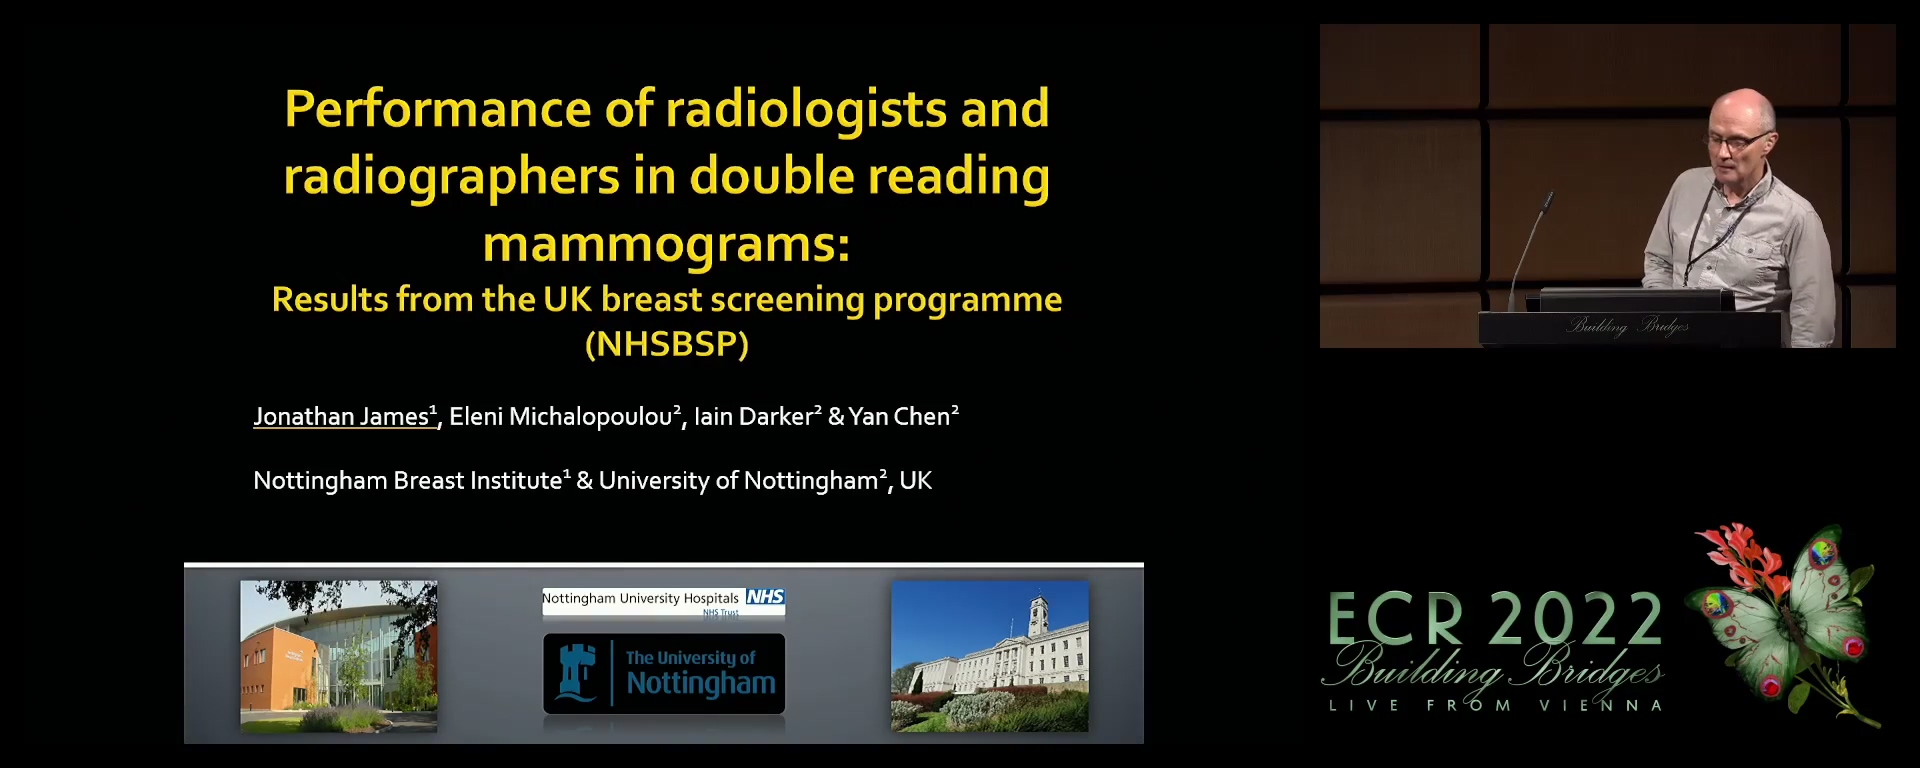 Comparison of the performance of radiologists and radiographers in the double reading of screening mammograms in a national breast screening programme